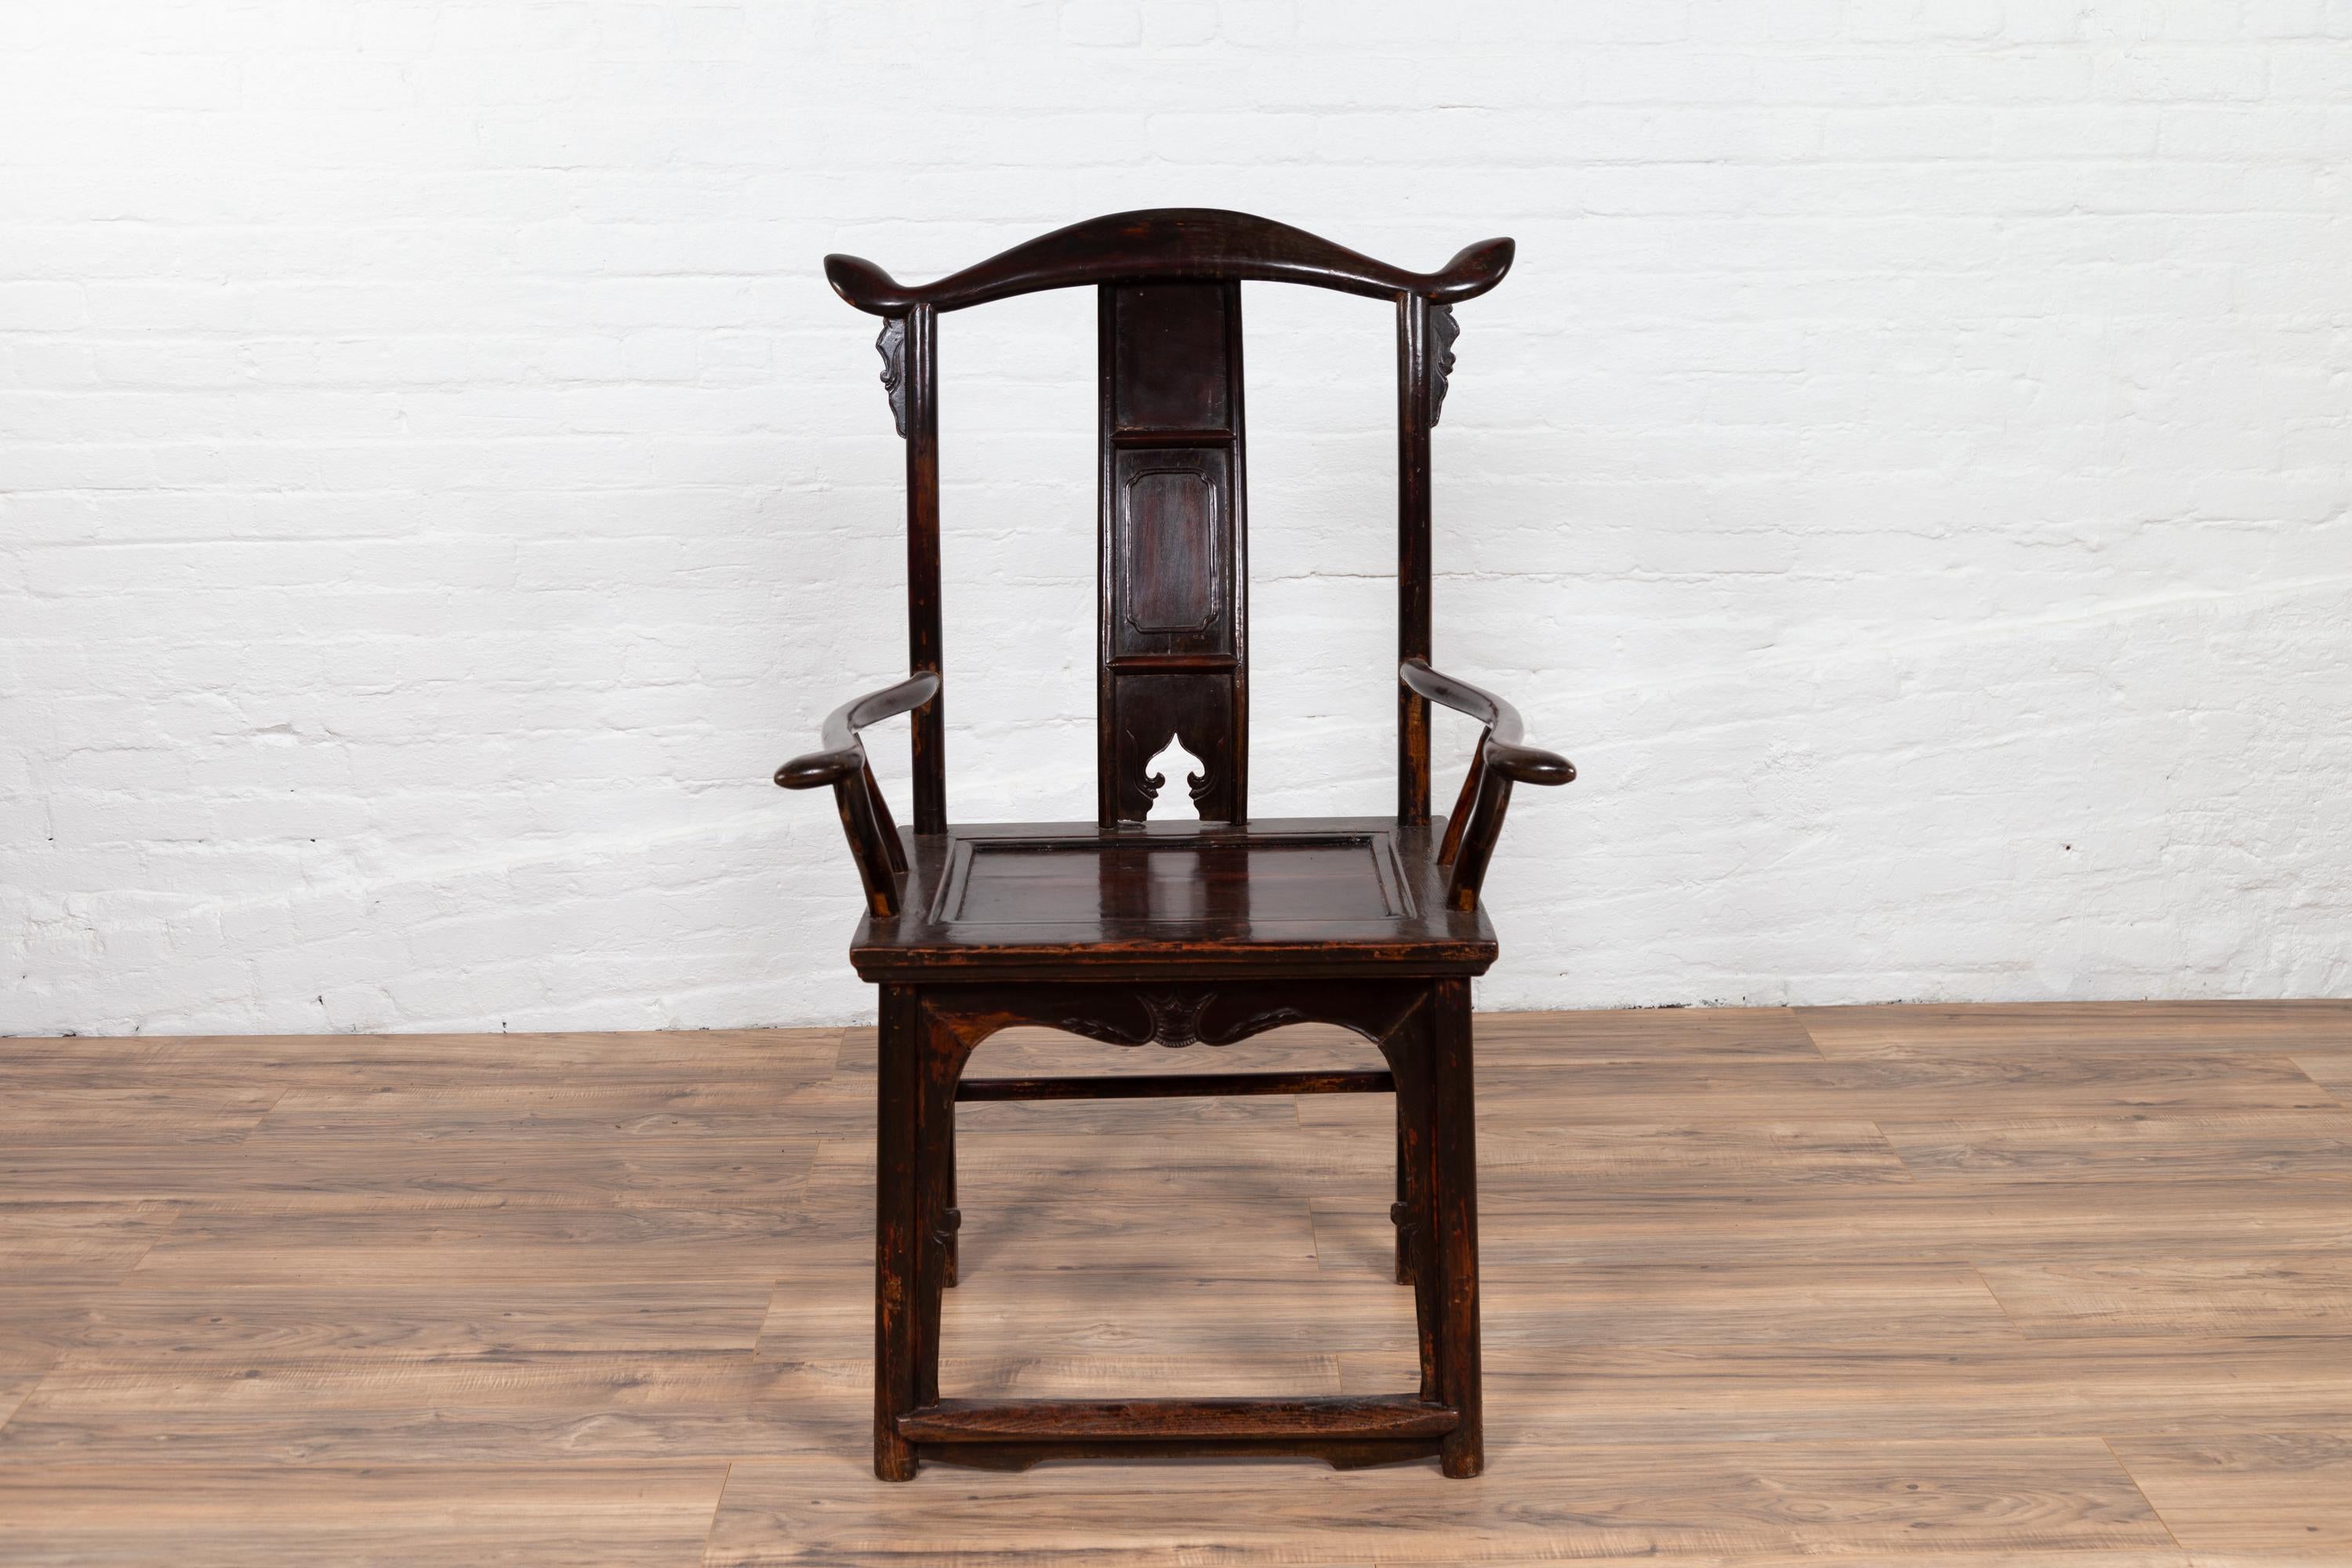 A Chinese antique Qing dynasty scholar's lamp-hanger armchair from the late 19th century, with sinuous pierced splat, dark patina, curving arms and side stretchers. Born in China in the later years of the 19th century, this scholar's lamp-hanger